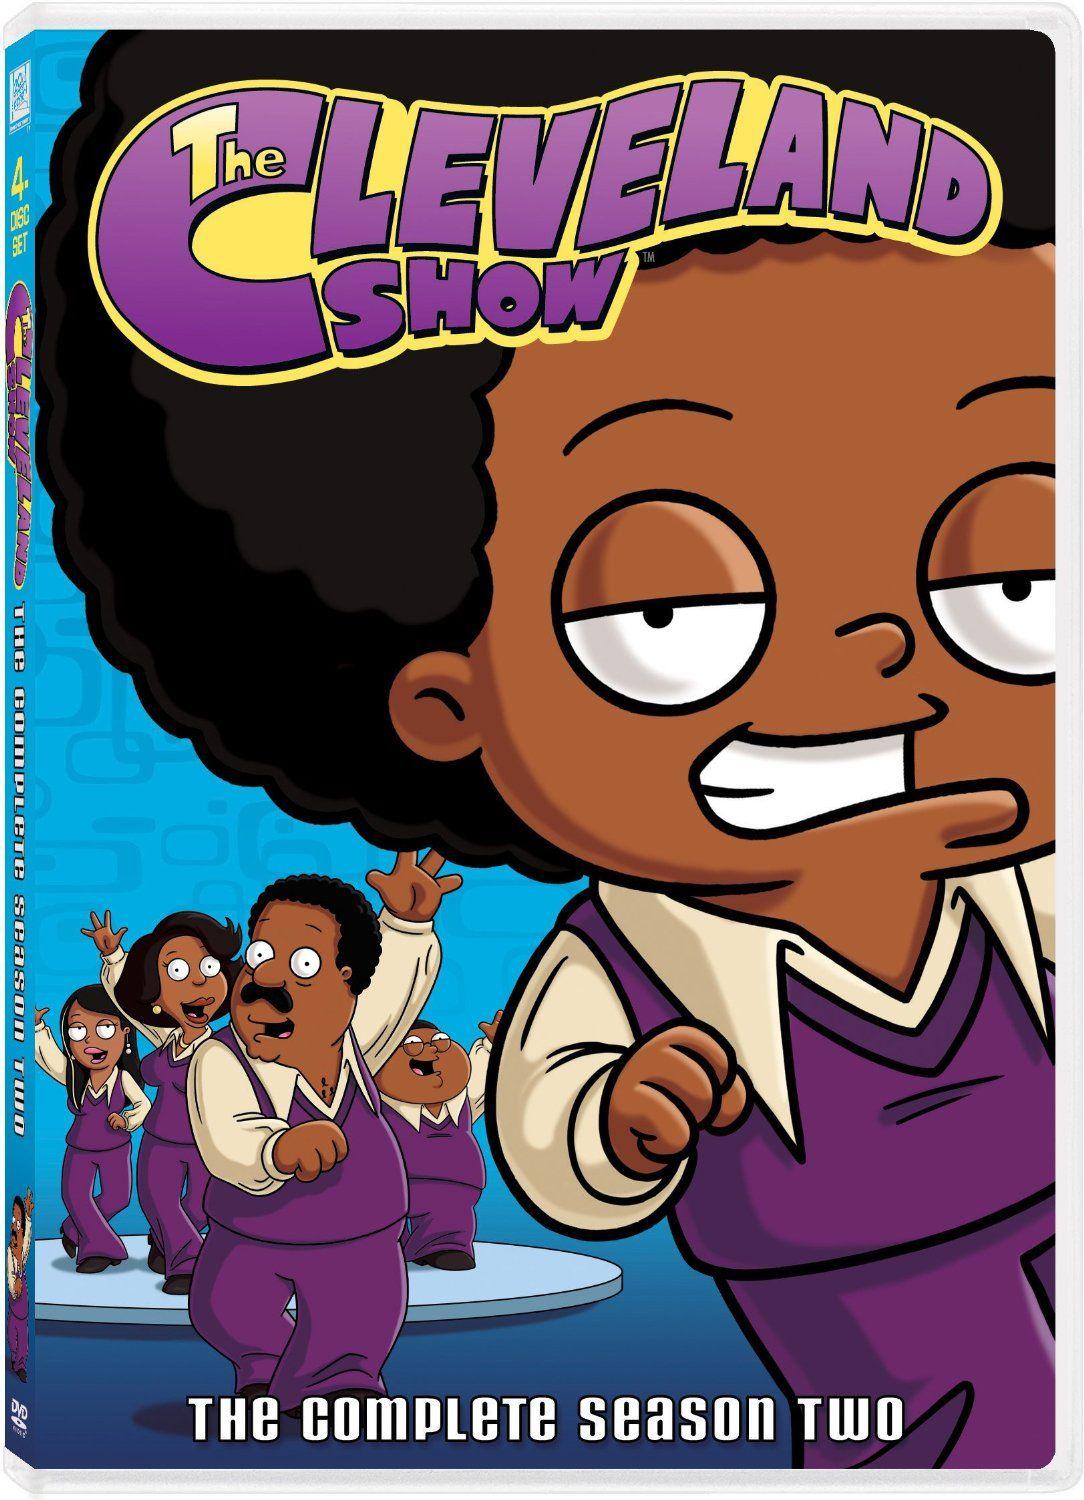 The Cleveland Show: The Complete Season Two